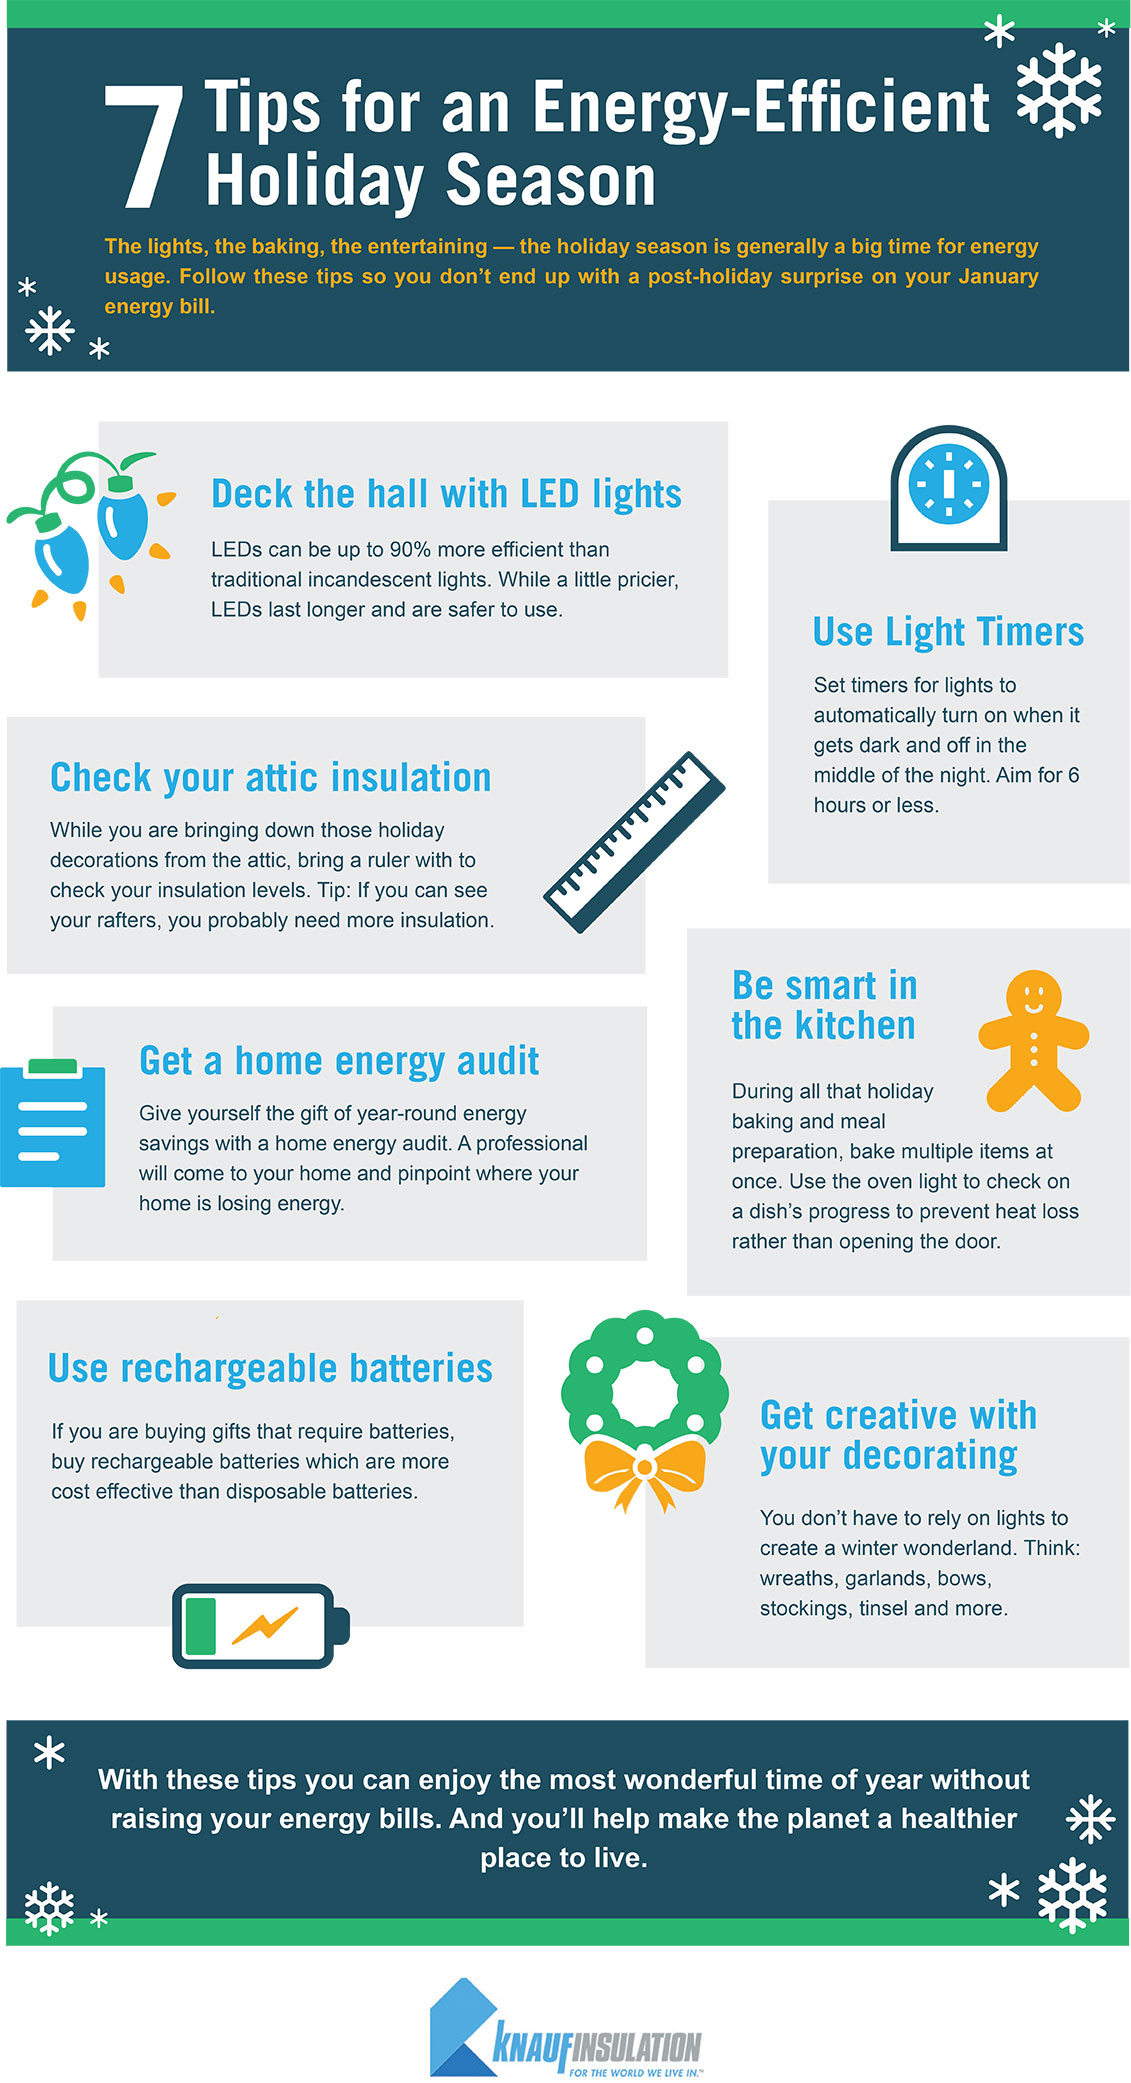 Tips to save on energy costs during the holidays